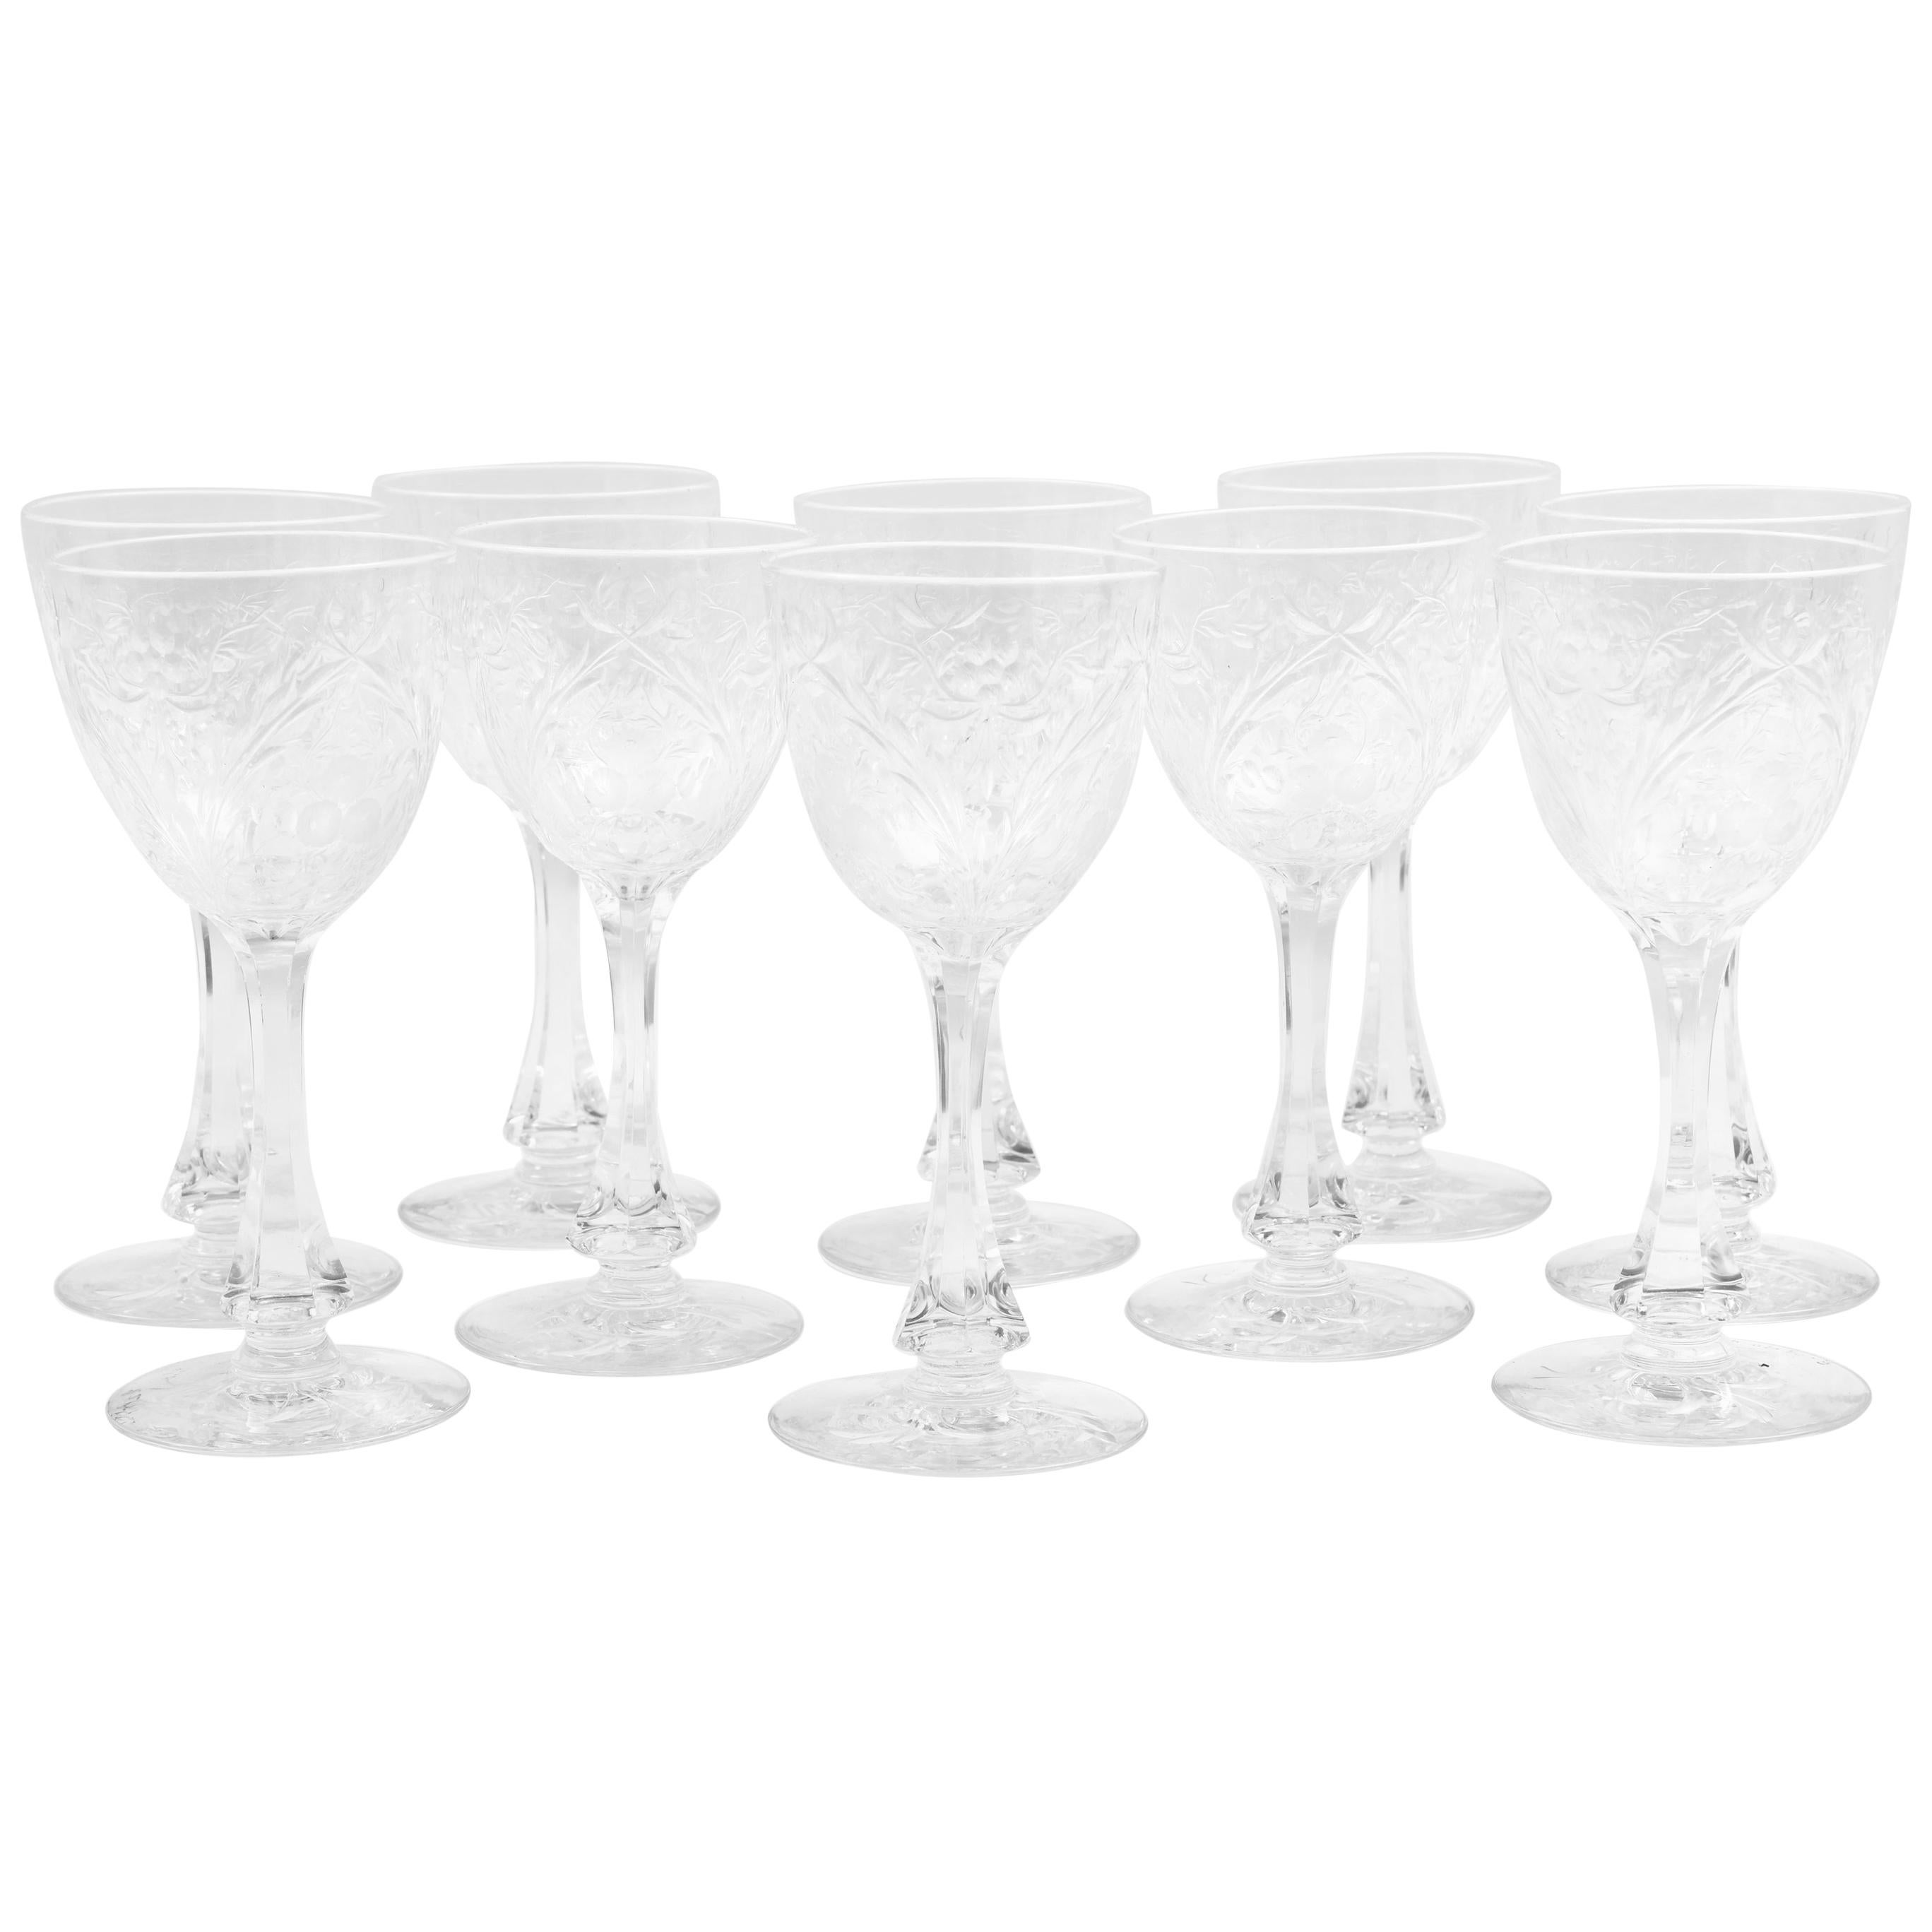 Ten Antique English Wine Glasses with Fully Cut Stem and Intaglio Floral Design